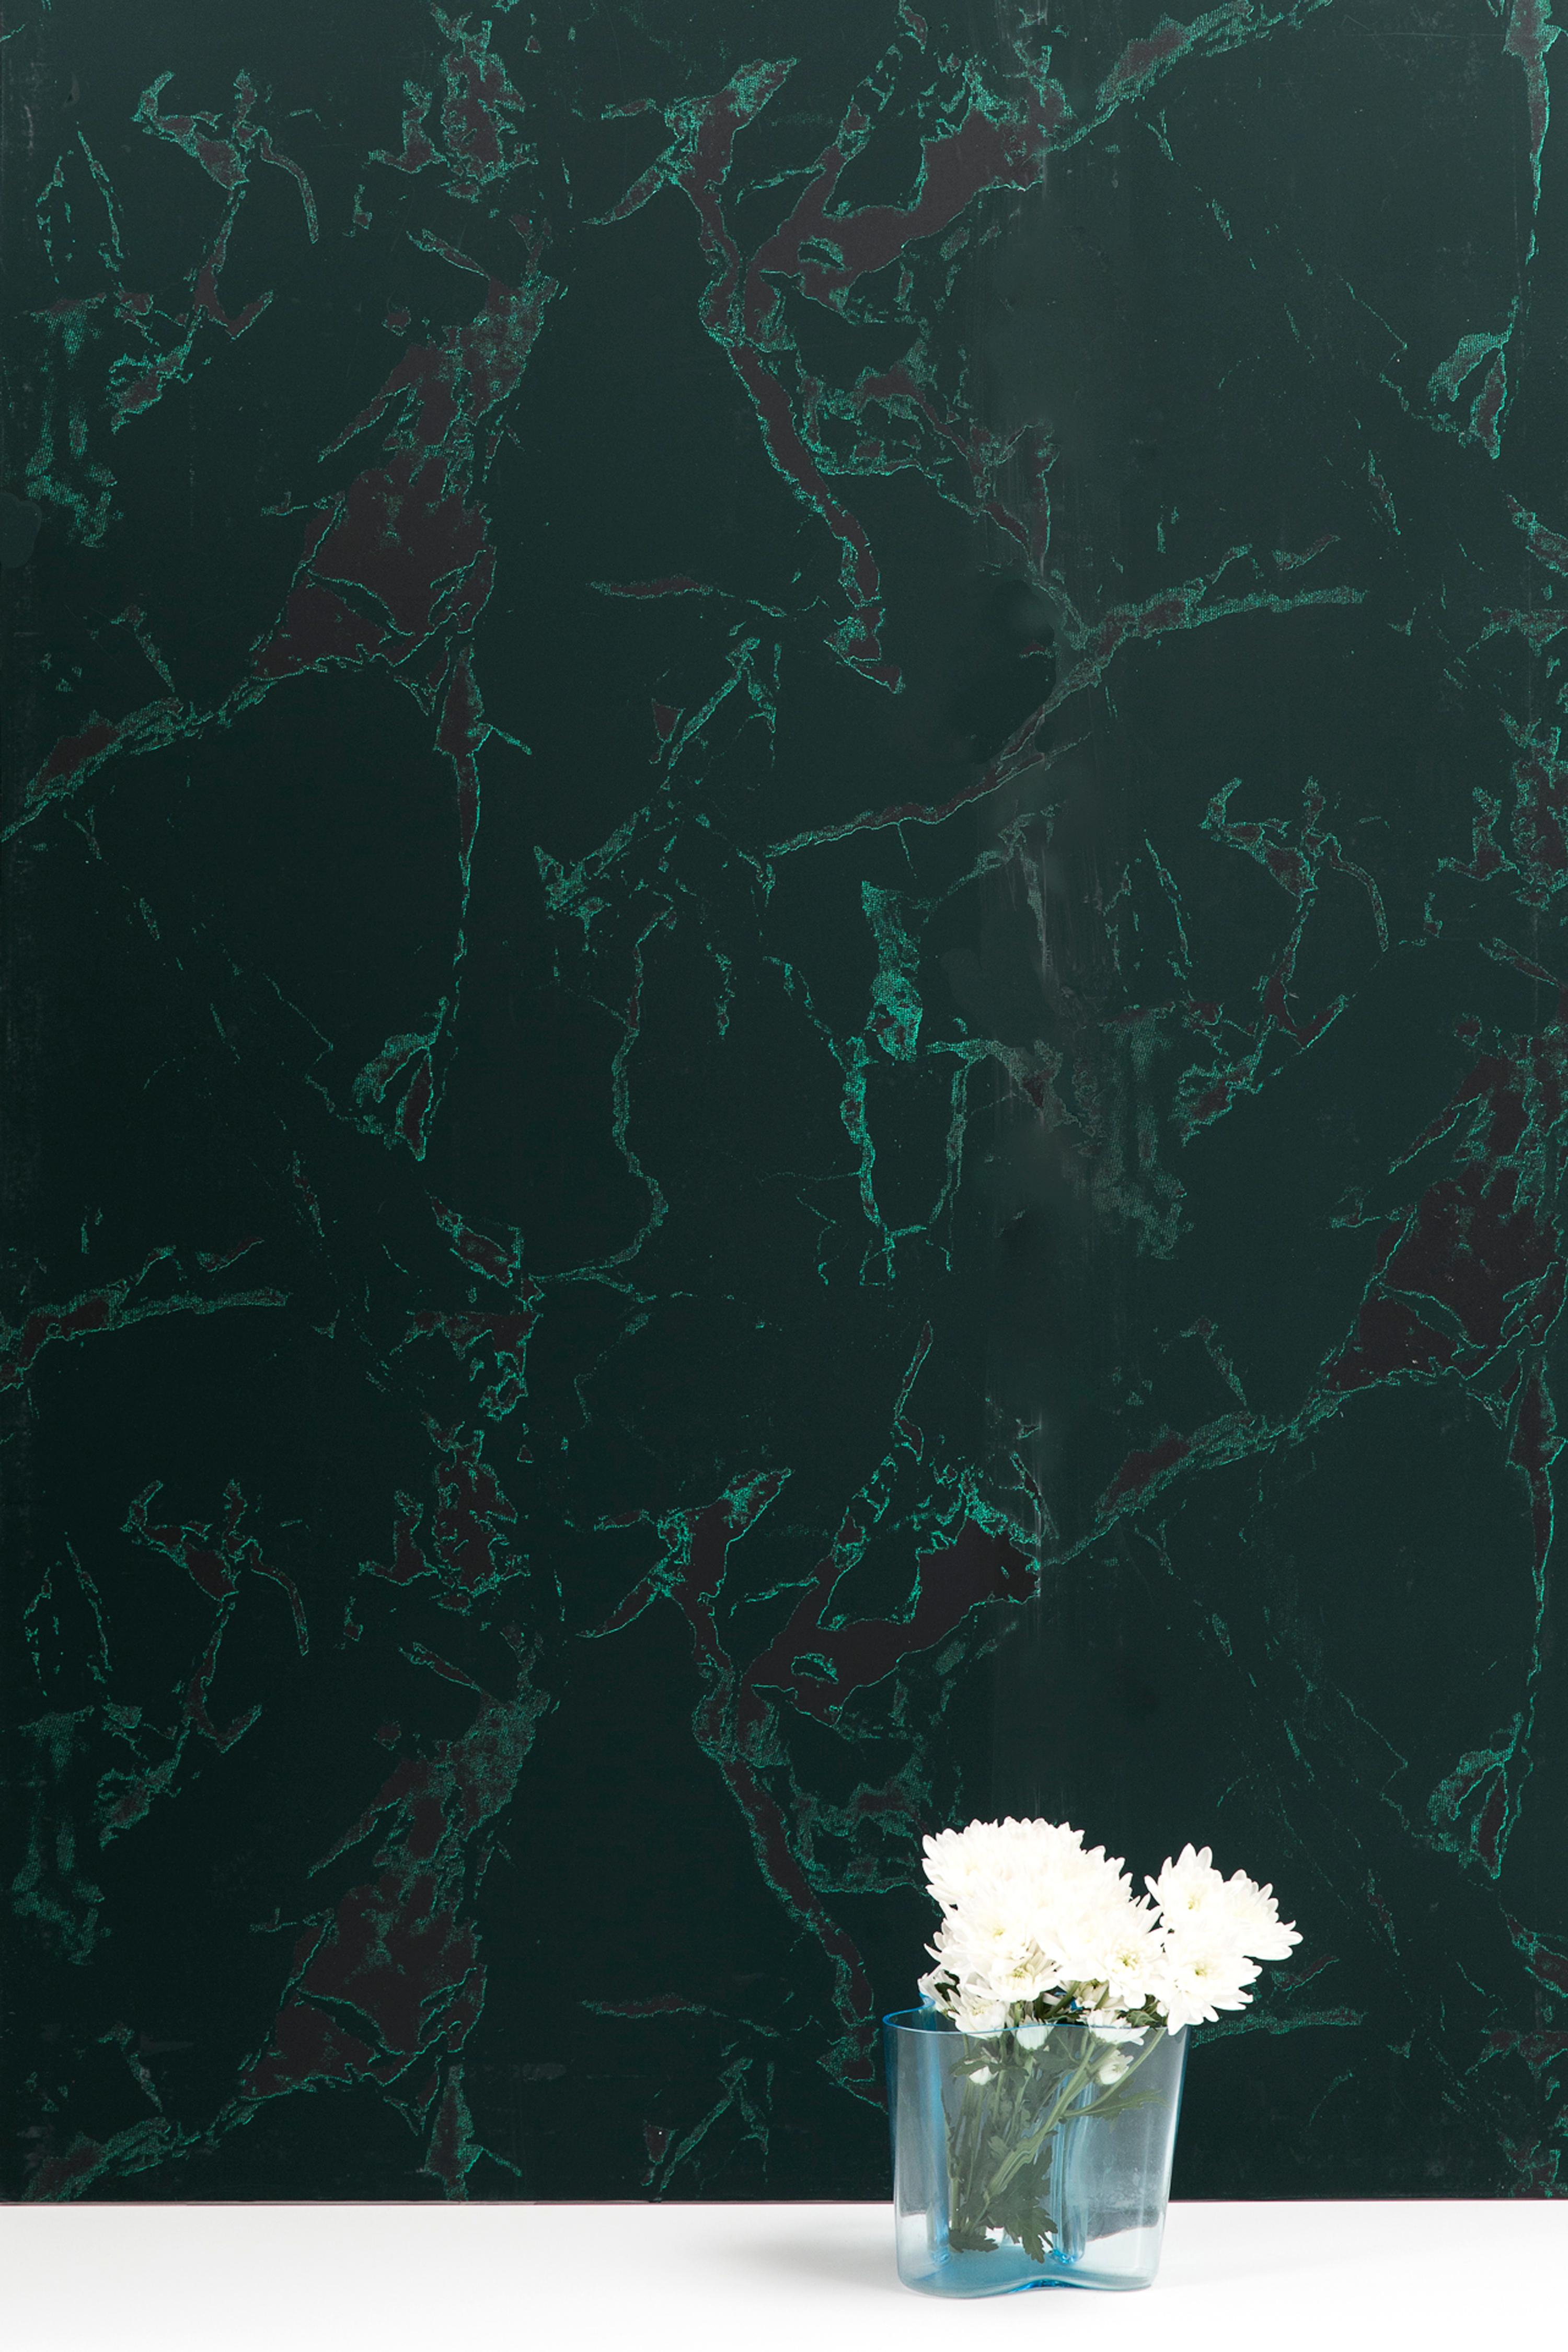 Empress green is a luxurious hand-printed wallpaper with dark pine green and black with pops of acid green that create a marble effect pattern. It is also washable, strippable, unpasted, and Class A fire rated. Made in the USA.

Half drop